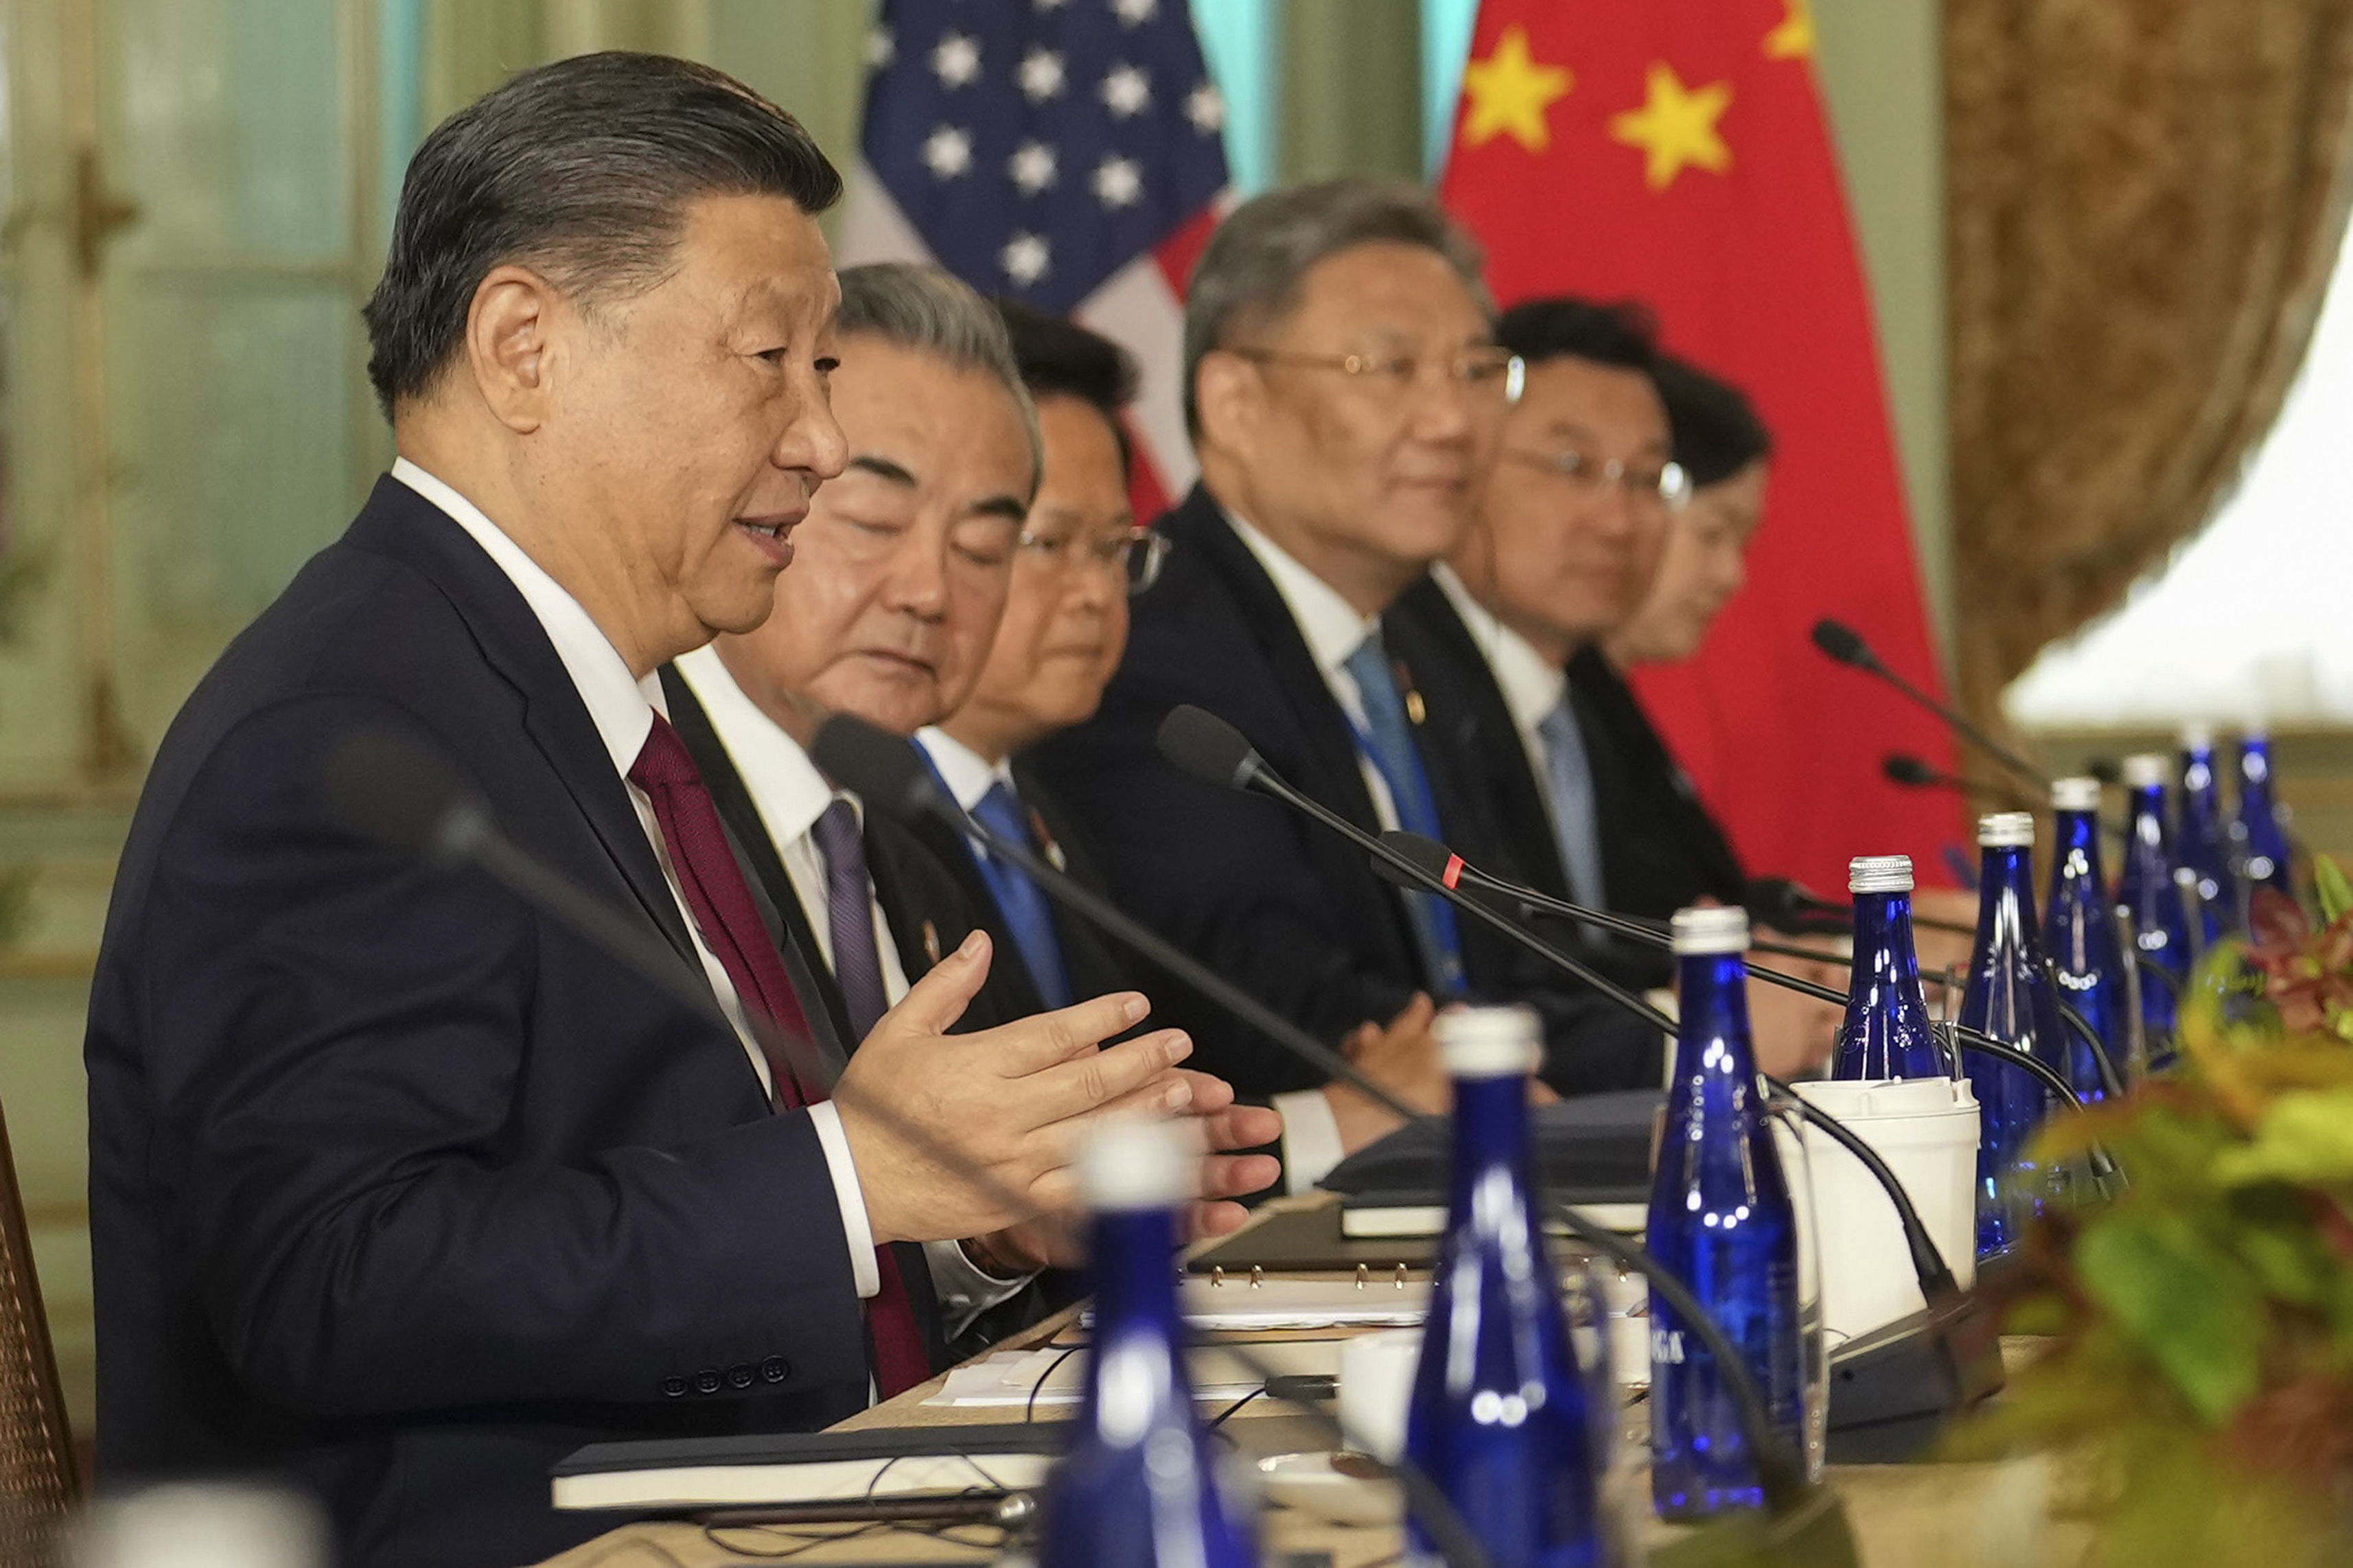 A row of people including China's President President Xi Jinping looks off screen.